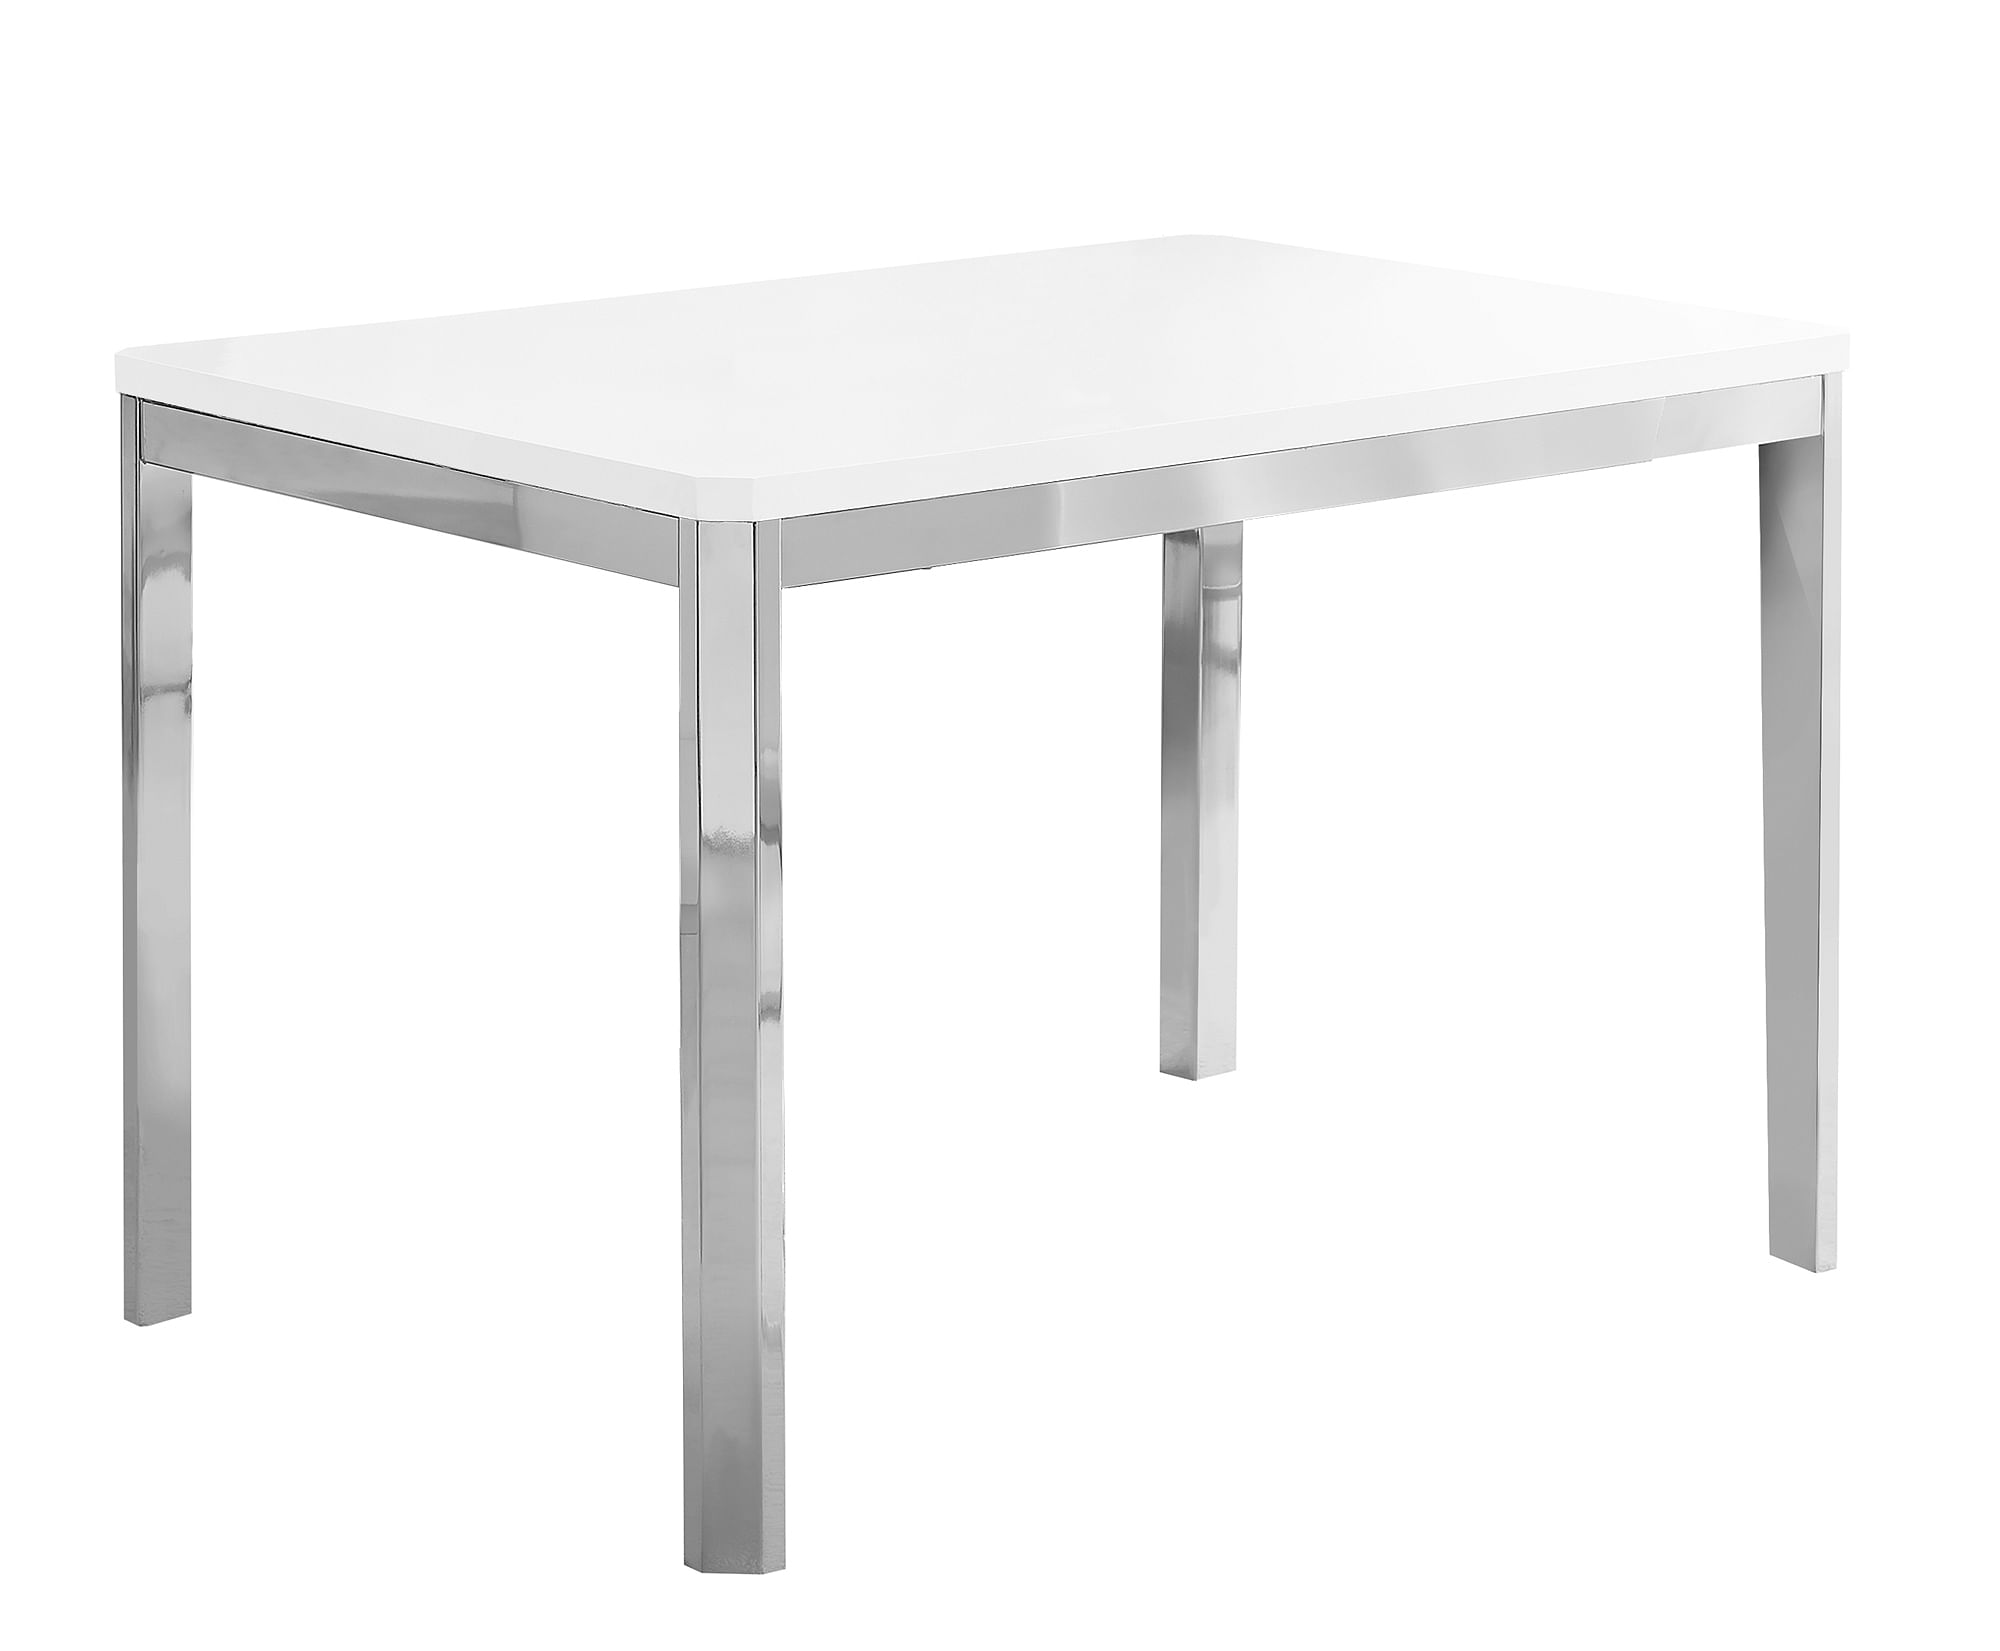 31.5" x 47.5" x 30" White Particle Board Metal Dining Table